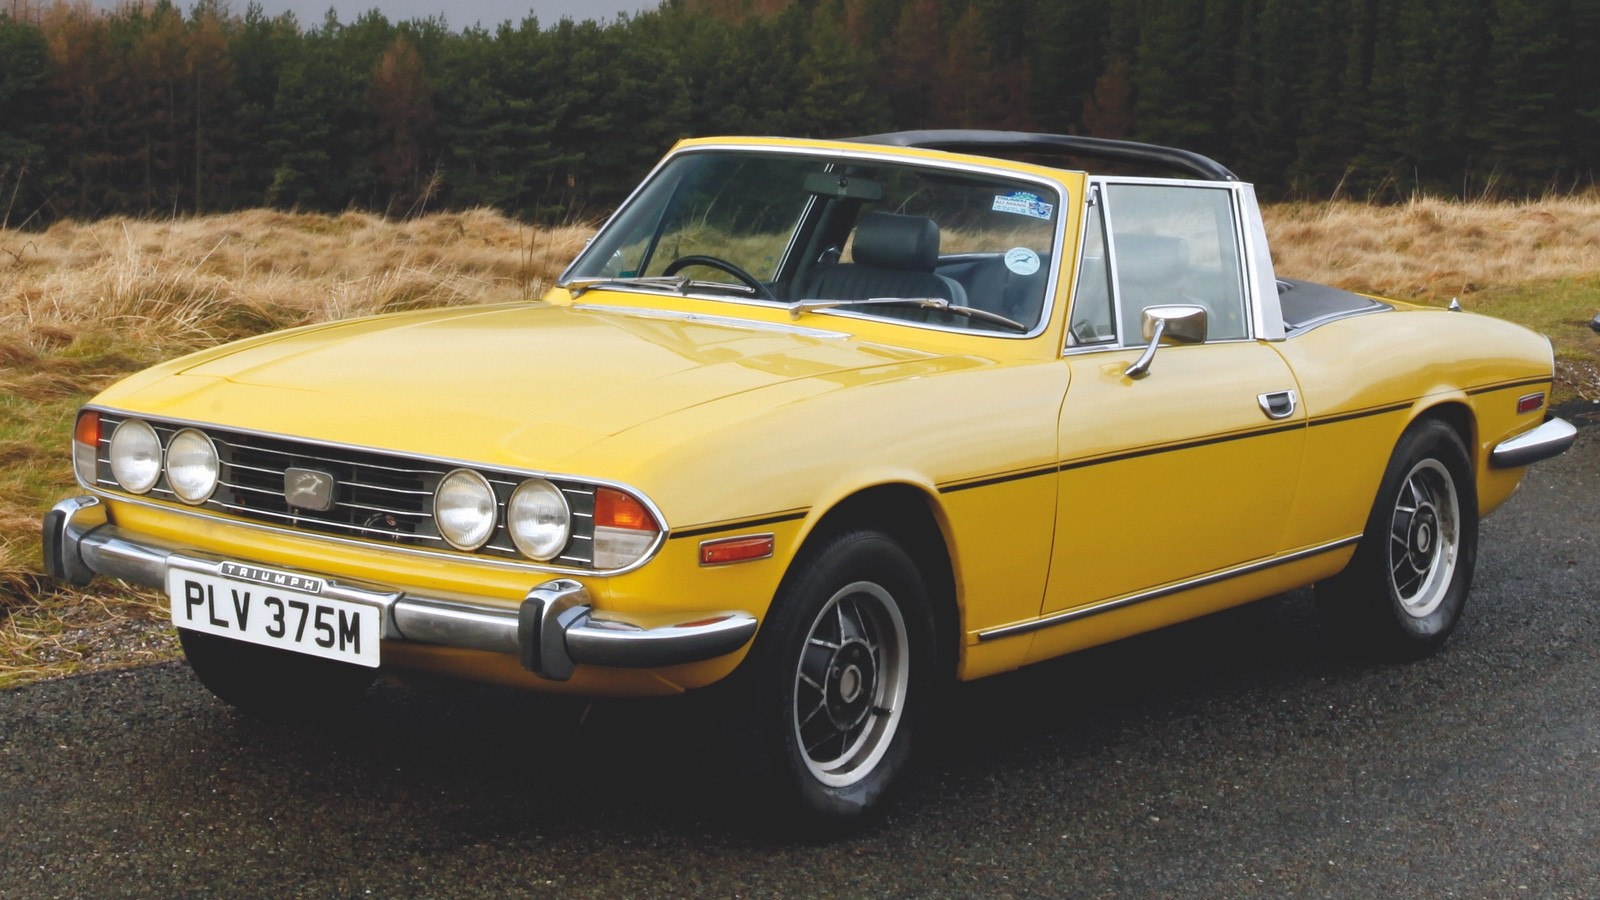 Flawed icons: 21 classic cars that were famously faulty